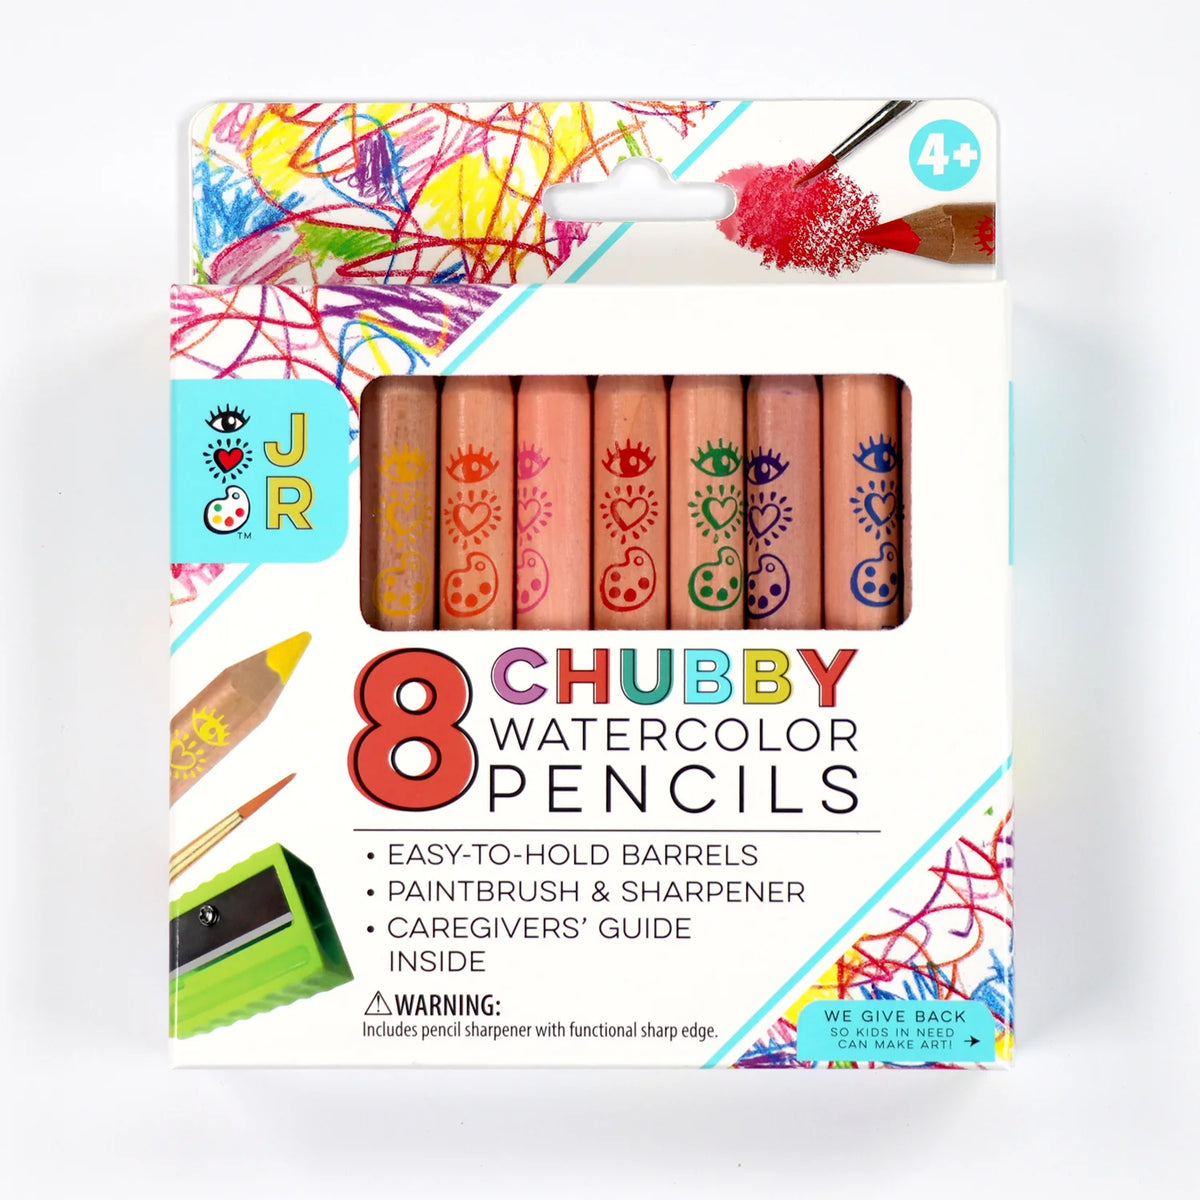 8 Chubby Watercolor Pencils Cover